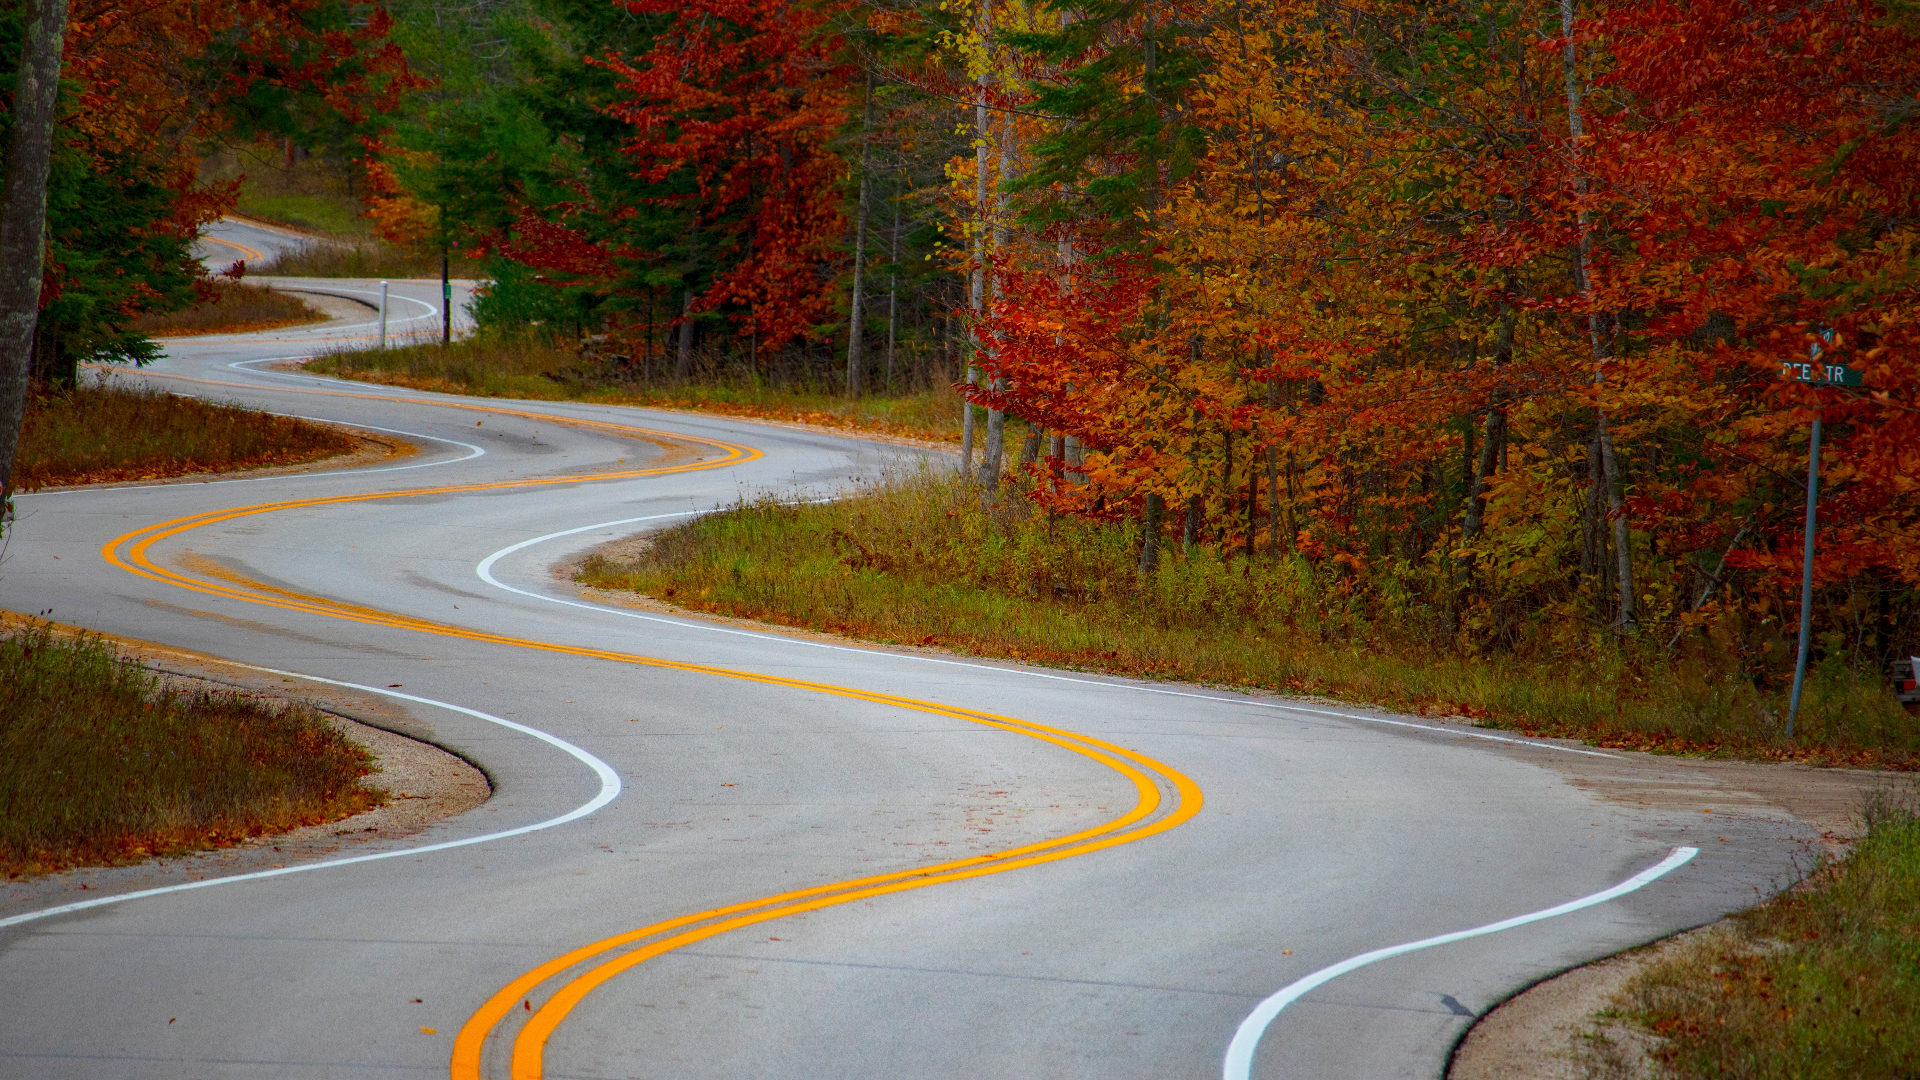 General 1920x1080 nature trees grass plants forest fall road hairpin turns Wisconsin USA